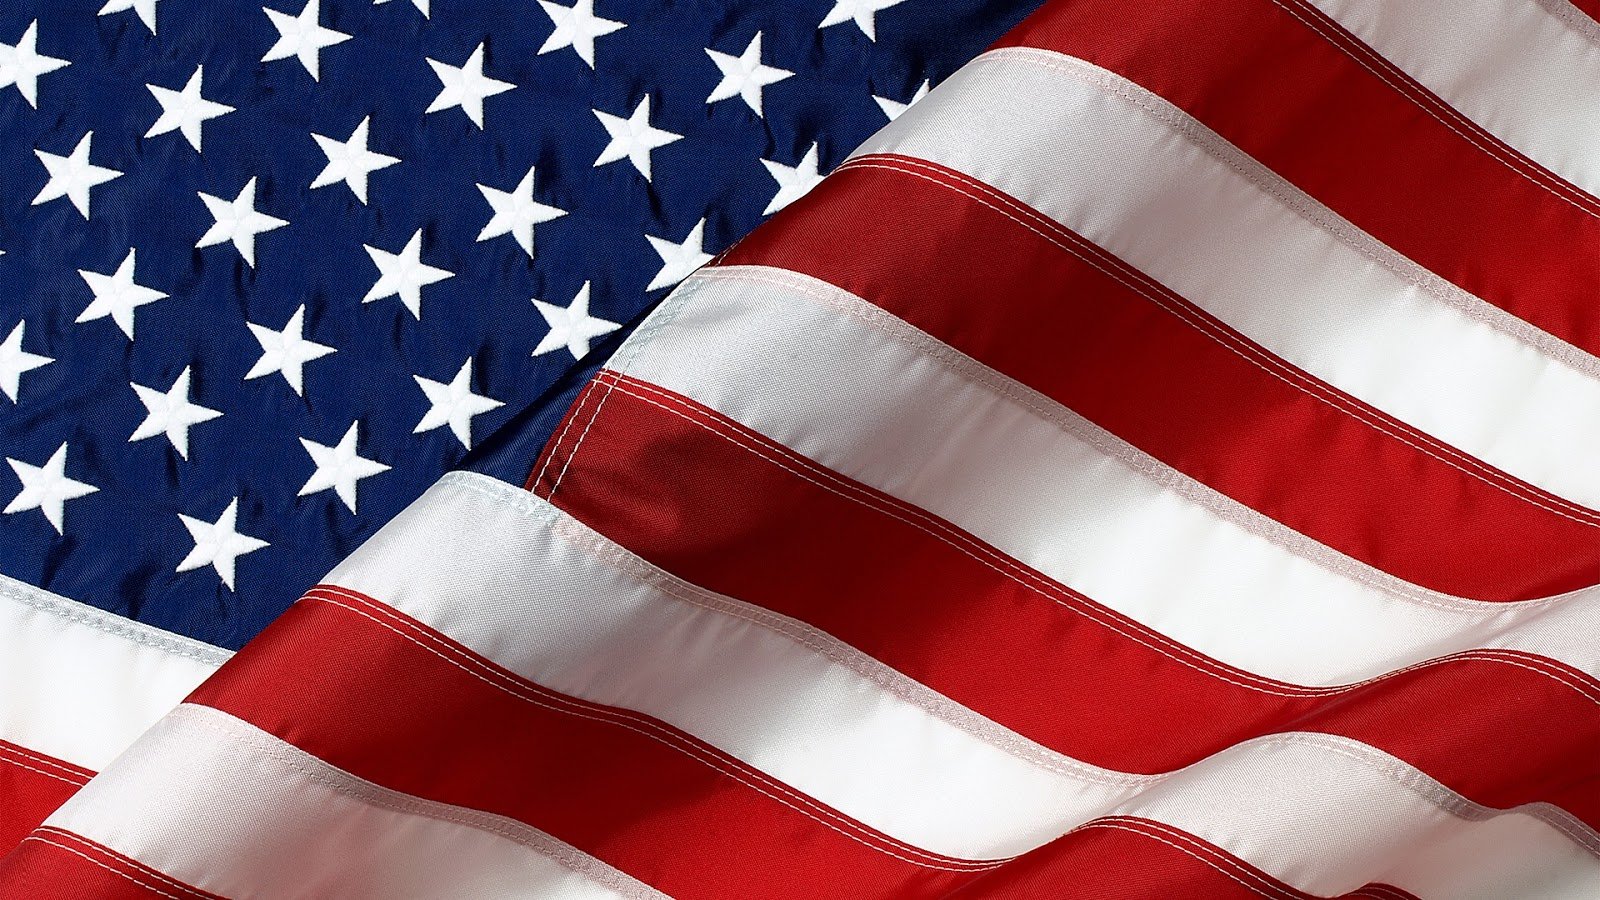  american flag hd wallpaper old american flag with black background